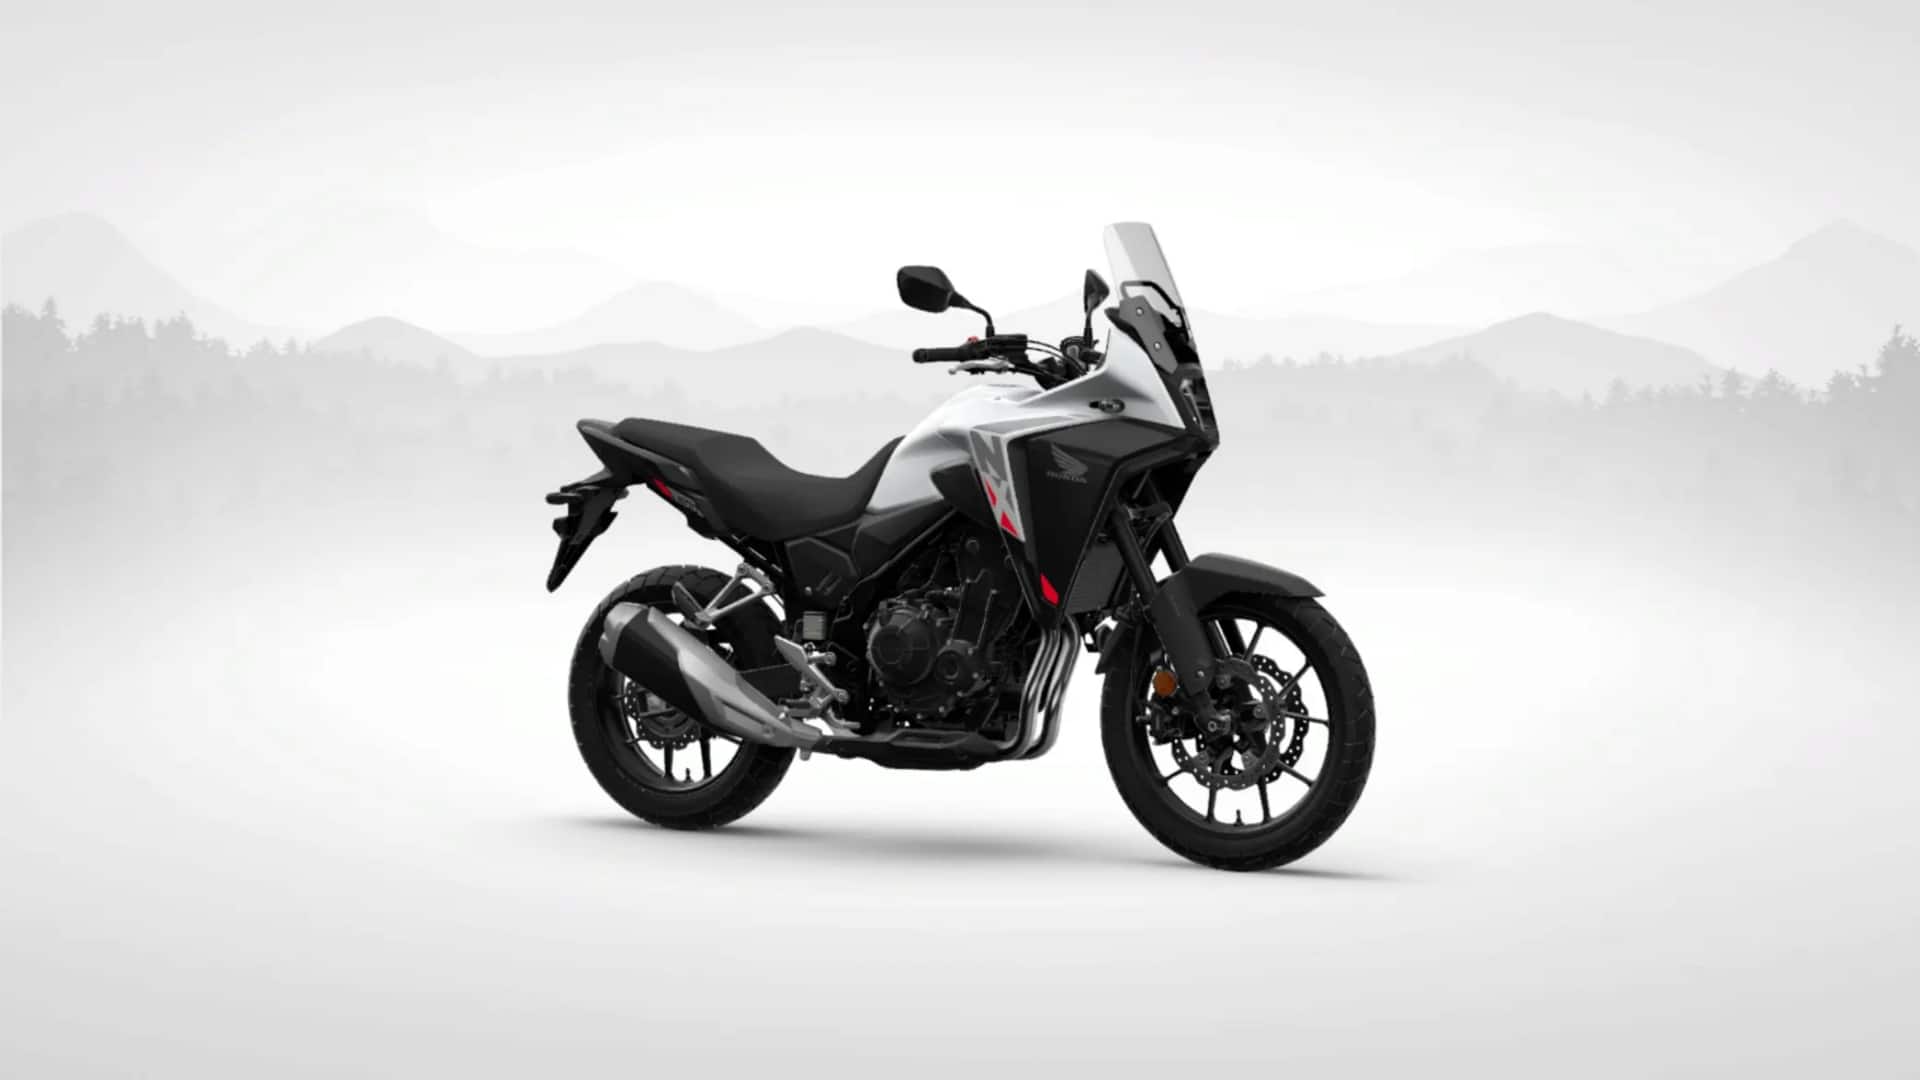 Honda NX500 goes official in India at Rs. 5.9 lakh 